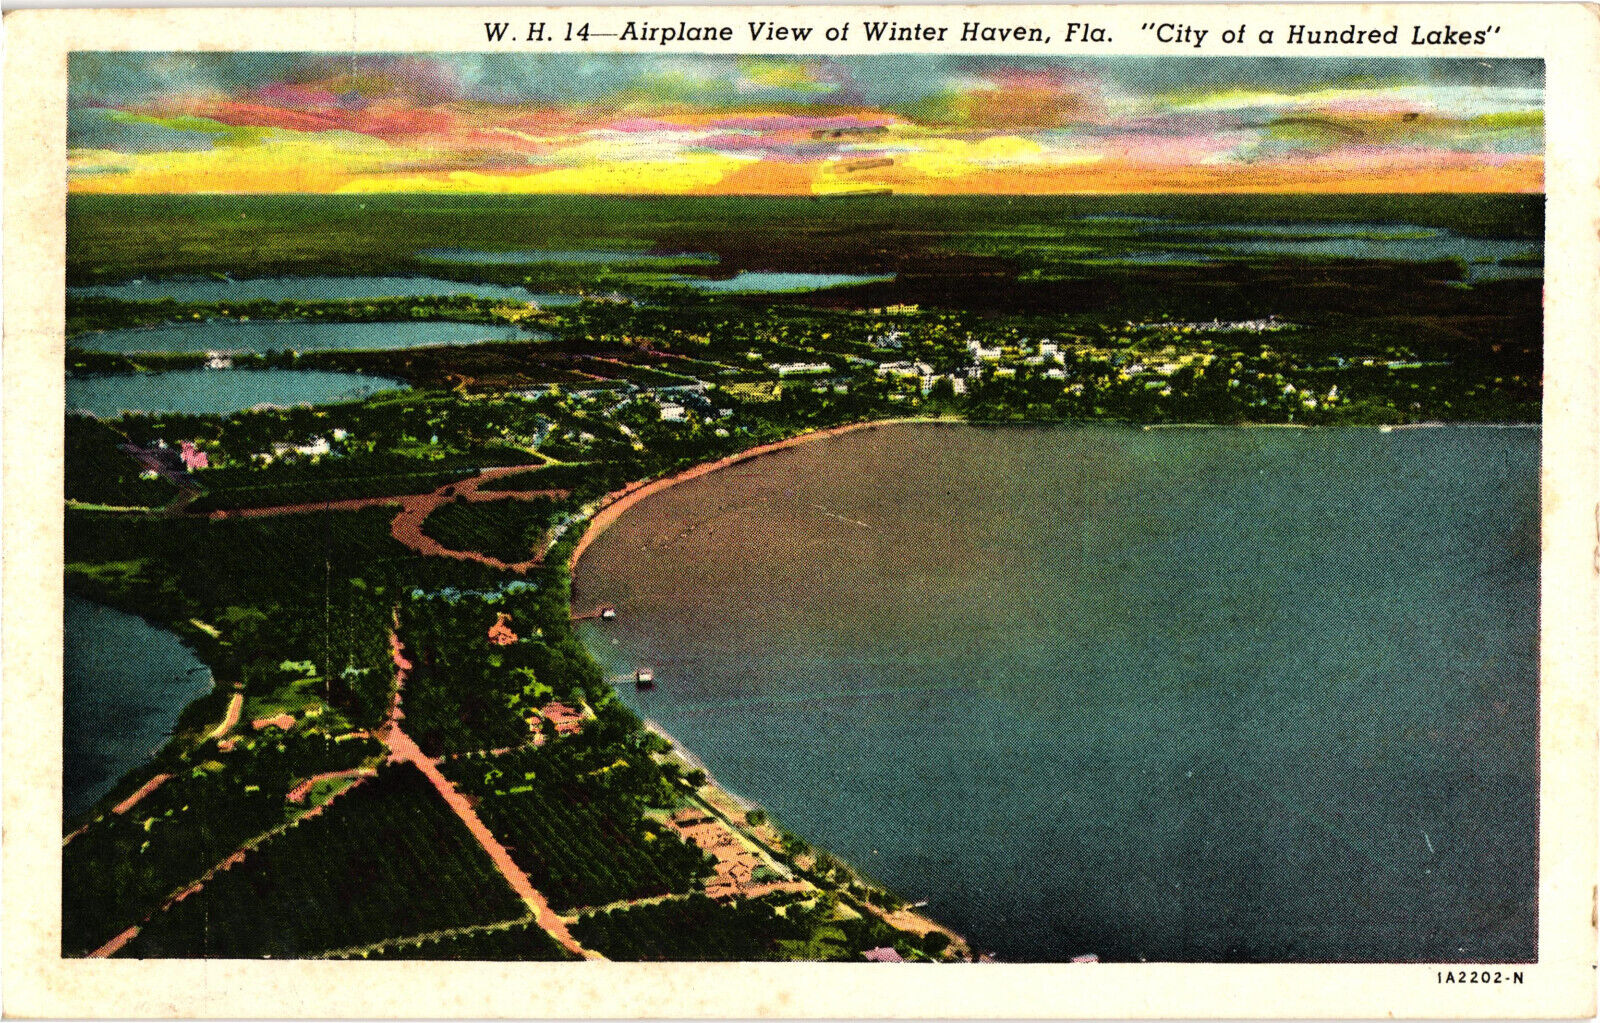 W.H. Airplane View of Winter Haven Postcard Posted Lakeland News Co.